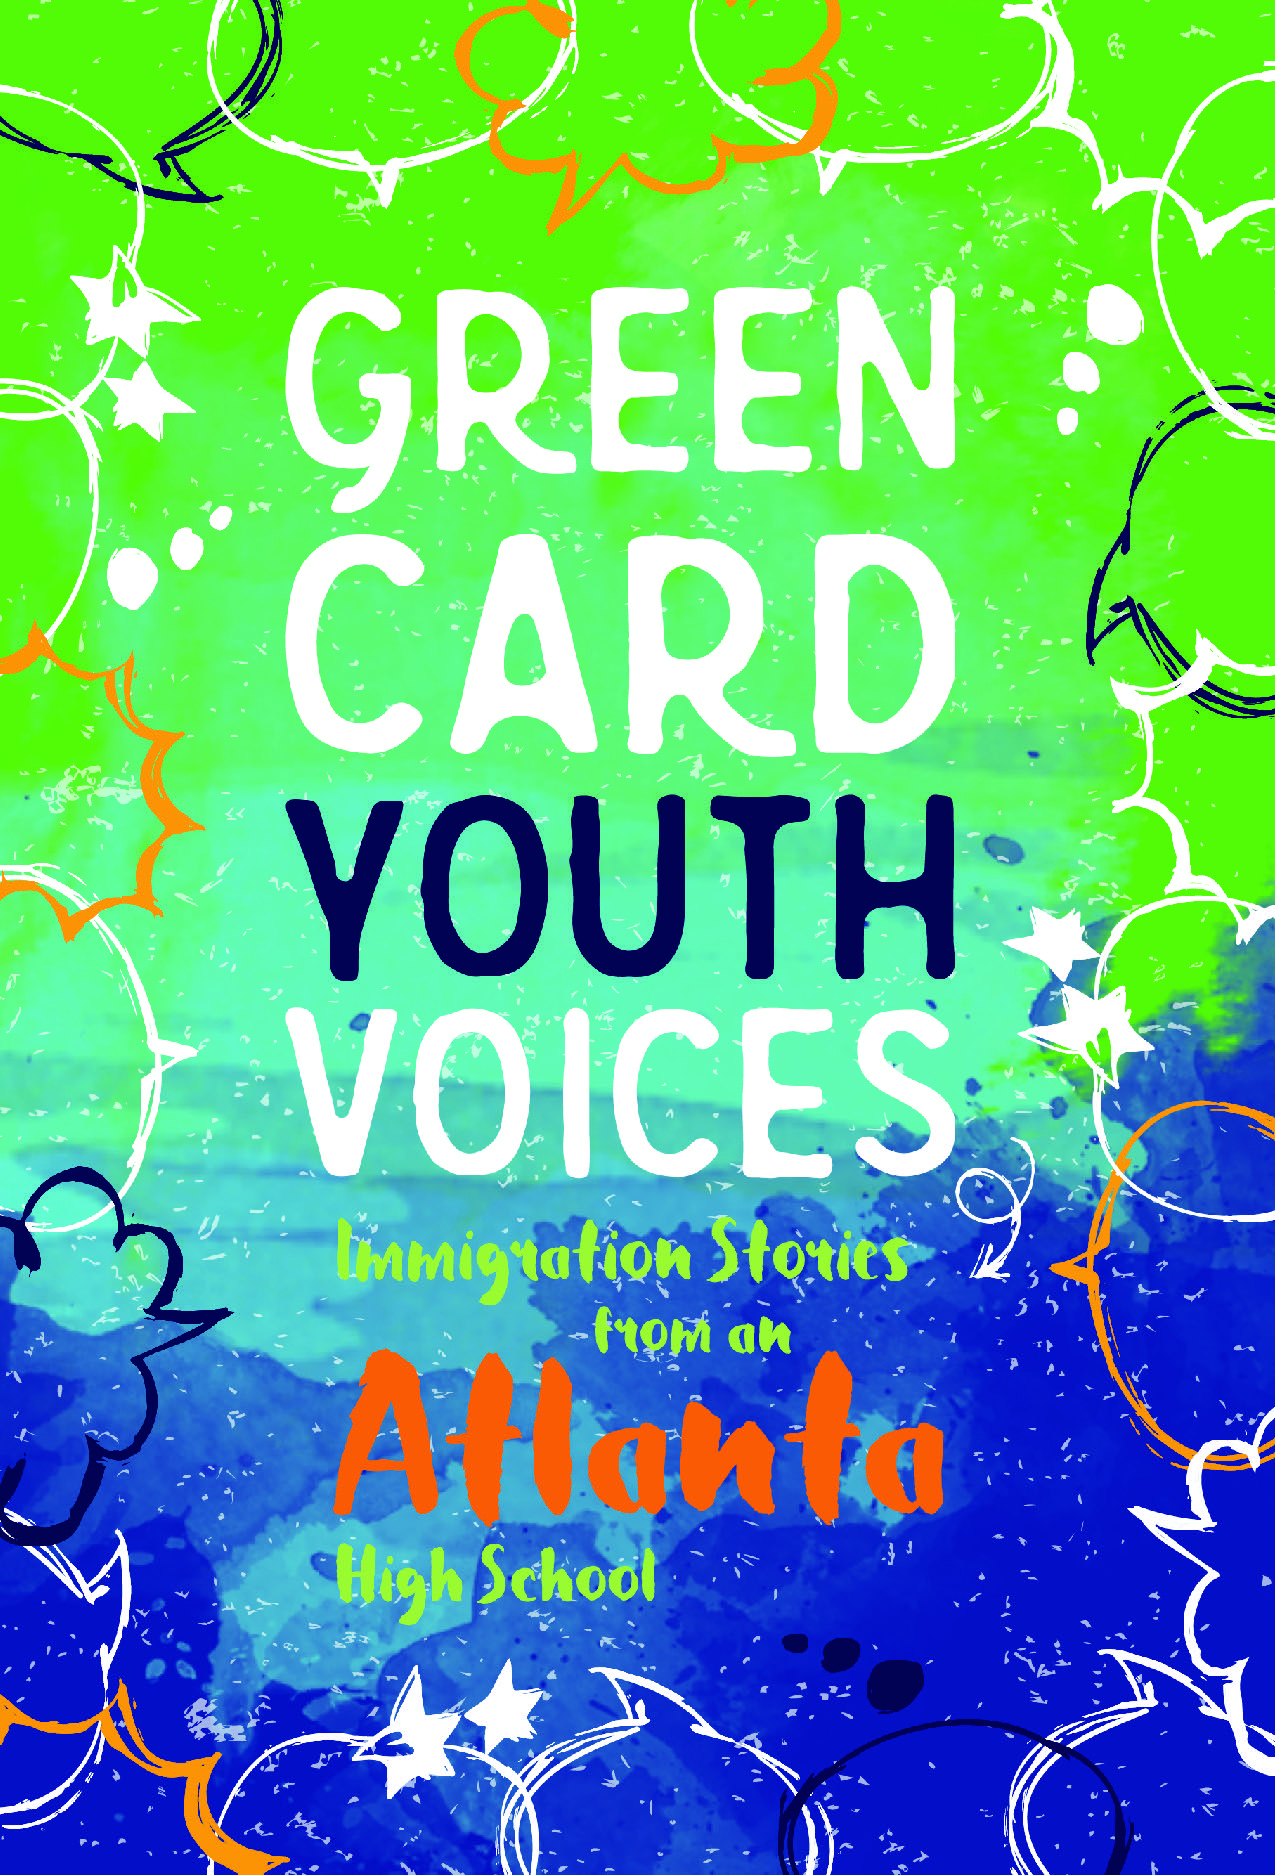 Green Card Youth Voices: Immigration Stories from an Atlanta High School